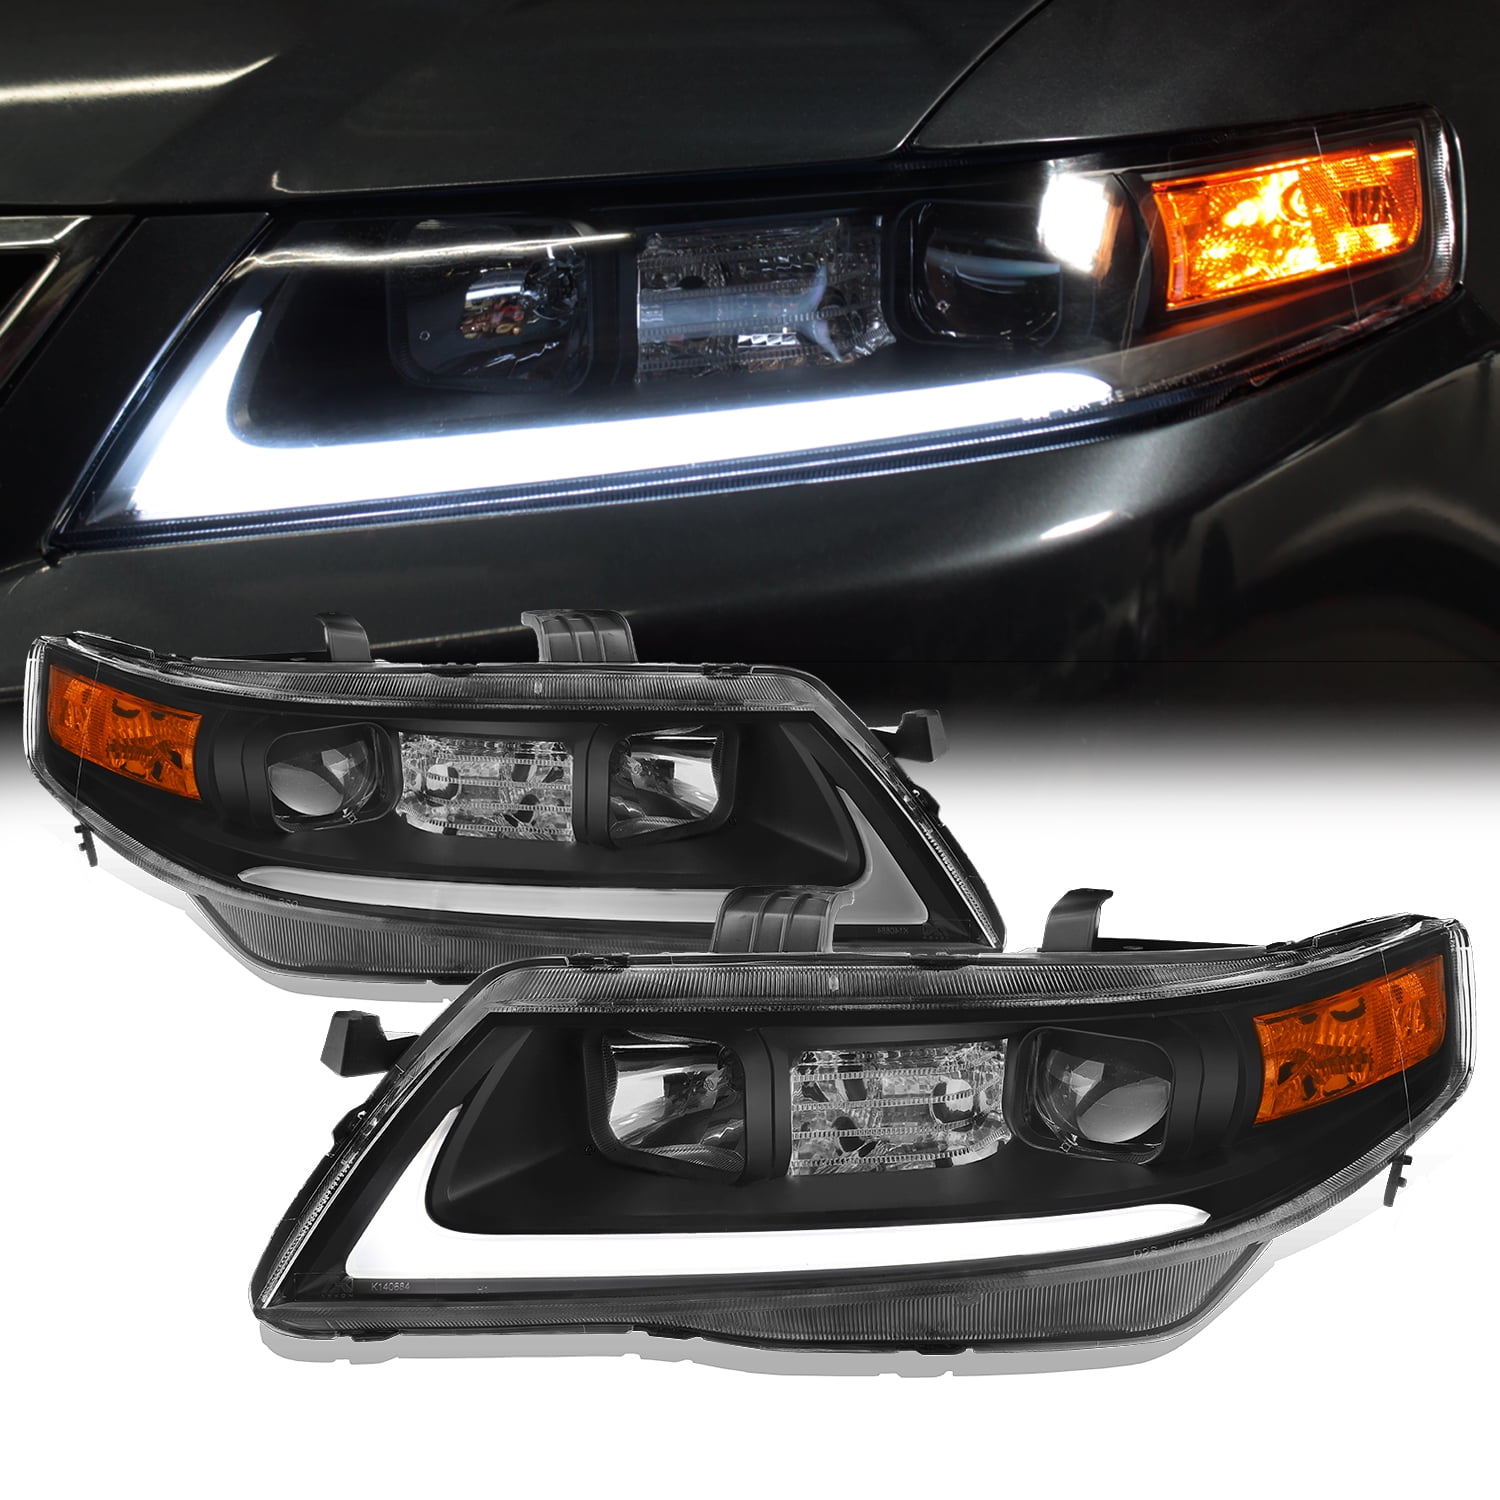 AKKON - Fits 2004-2008 Acura TSX CL9 LED Tube Projector Front